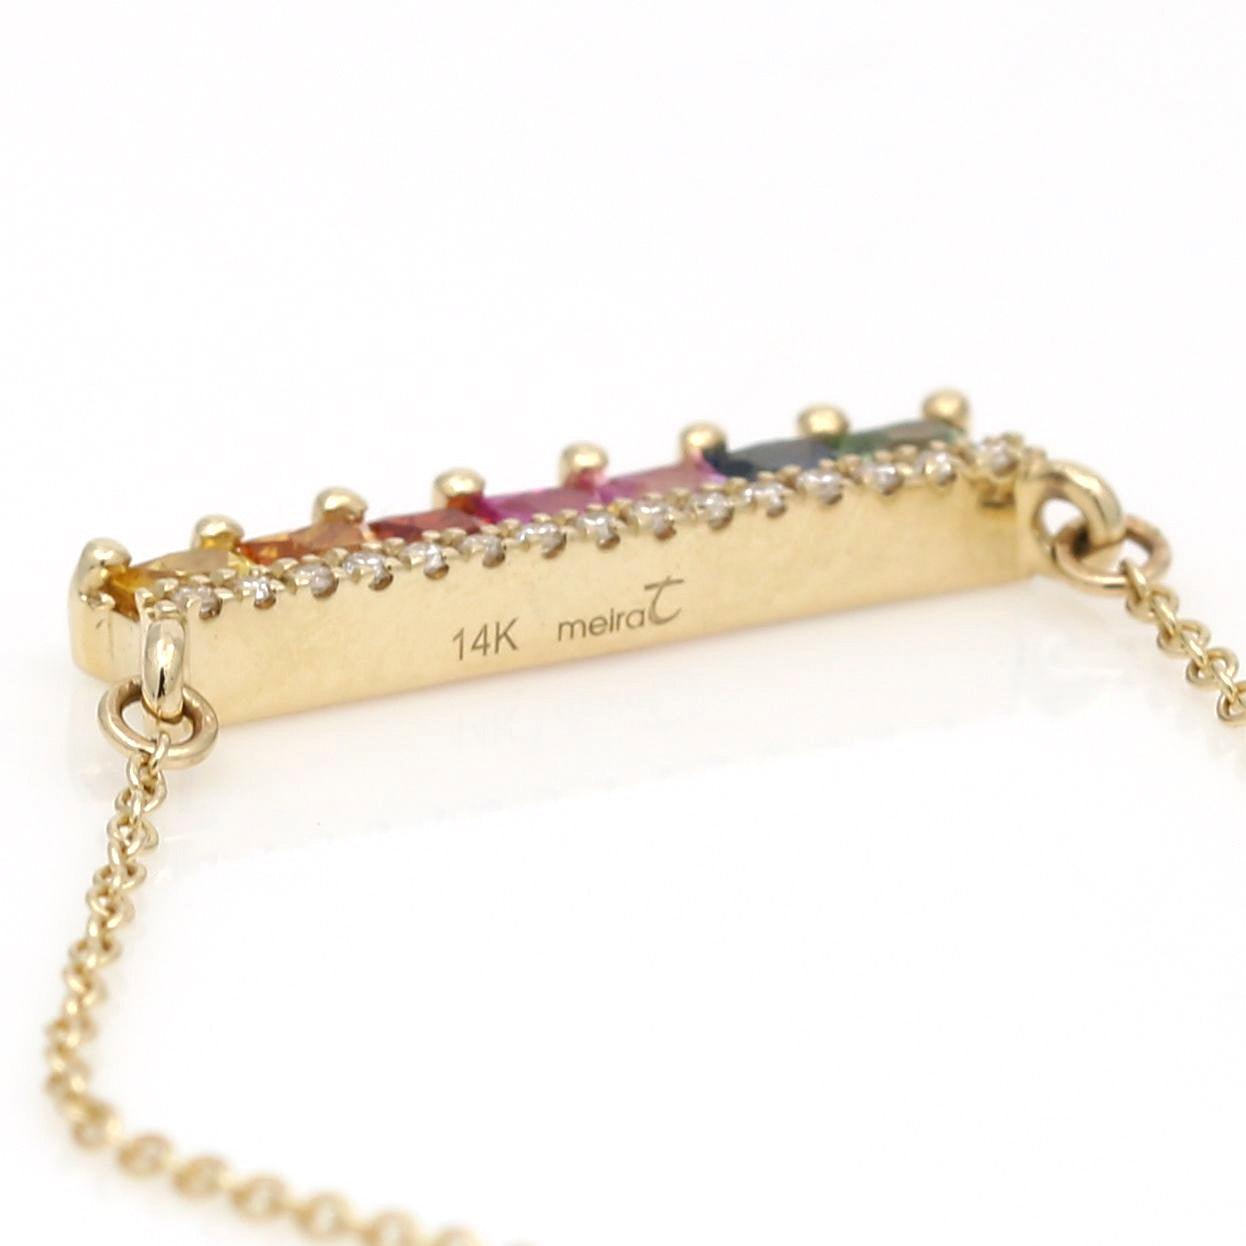 Meira T Diamond Rainbow Sapphire Bar Necklace in 14k Rose Gold - 31 Jewels Inc.